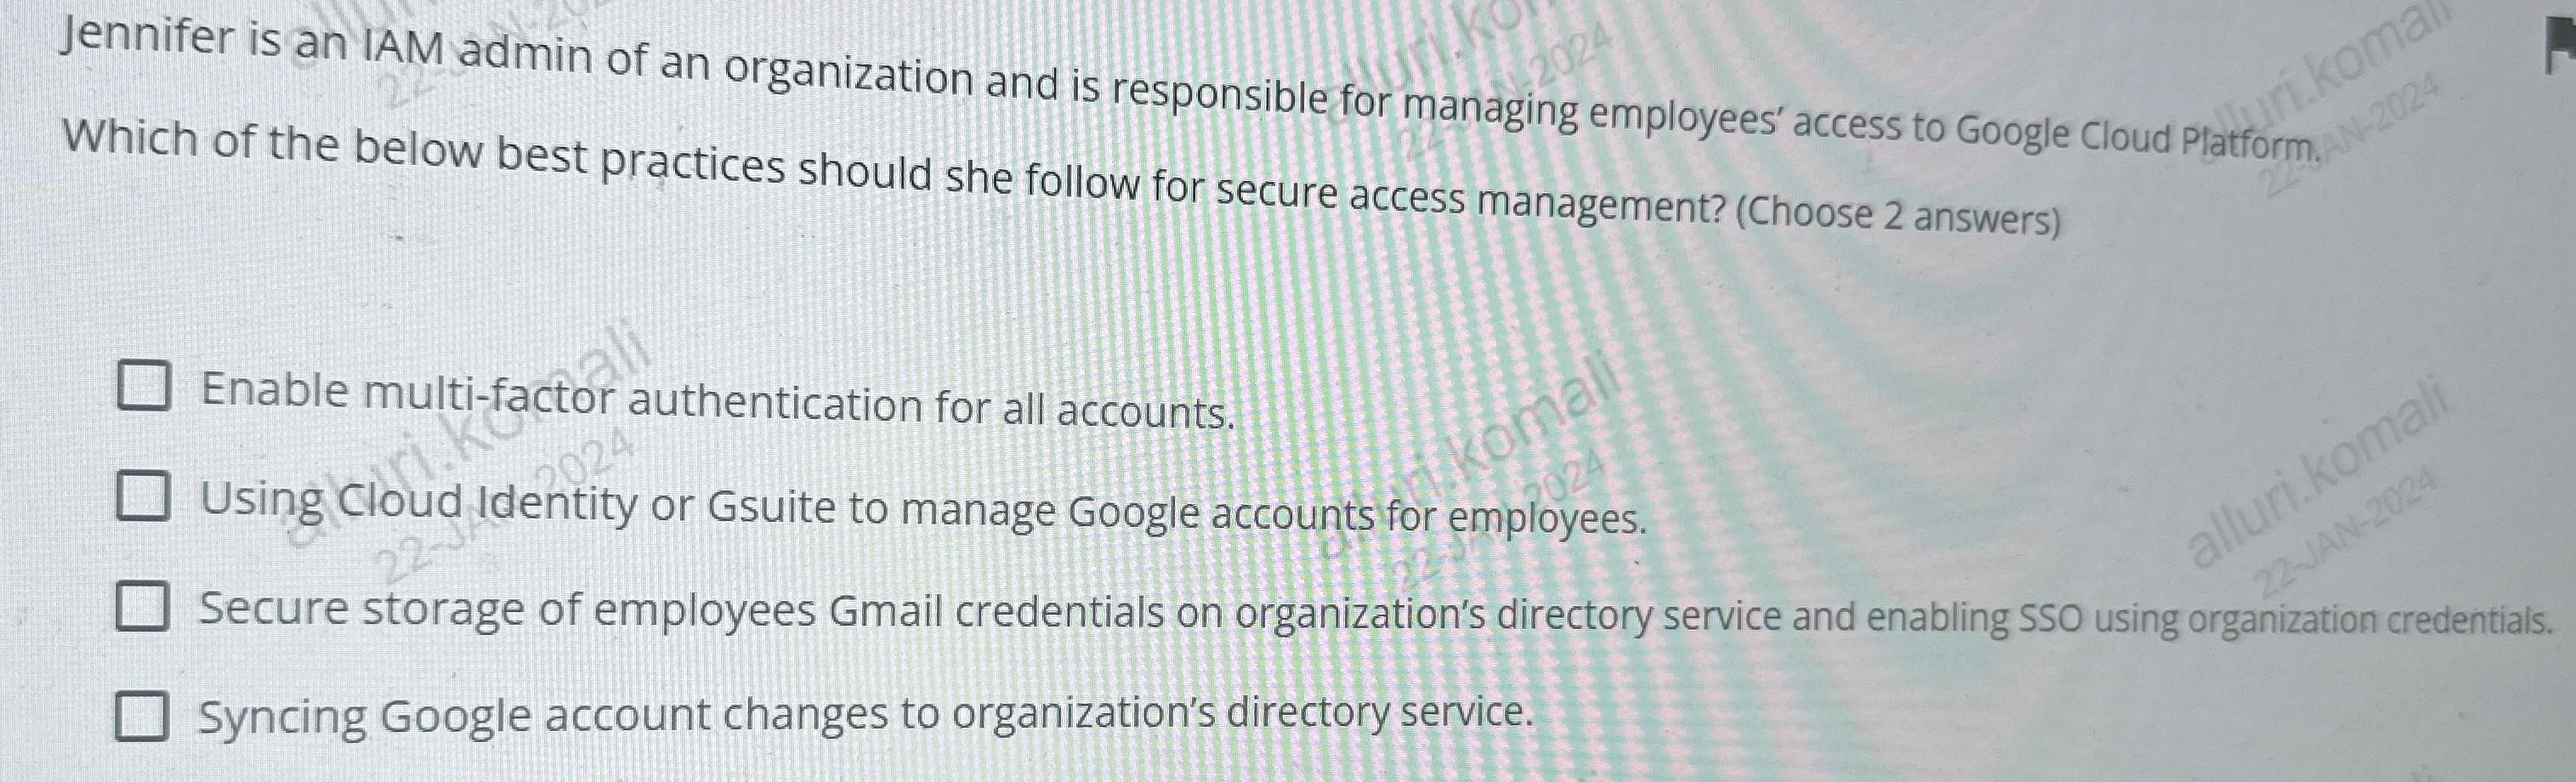 Jennifer is an IAM admin of an organization and is responsible for managing employees' access to Google Cloud